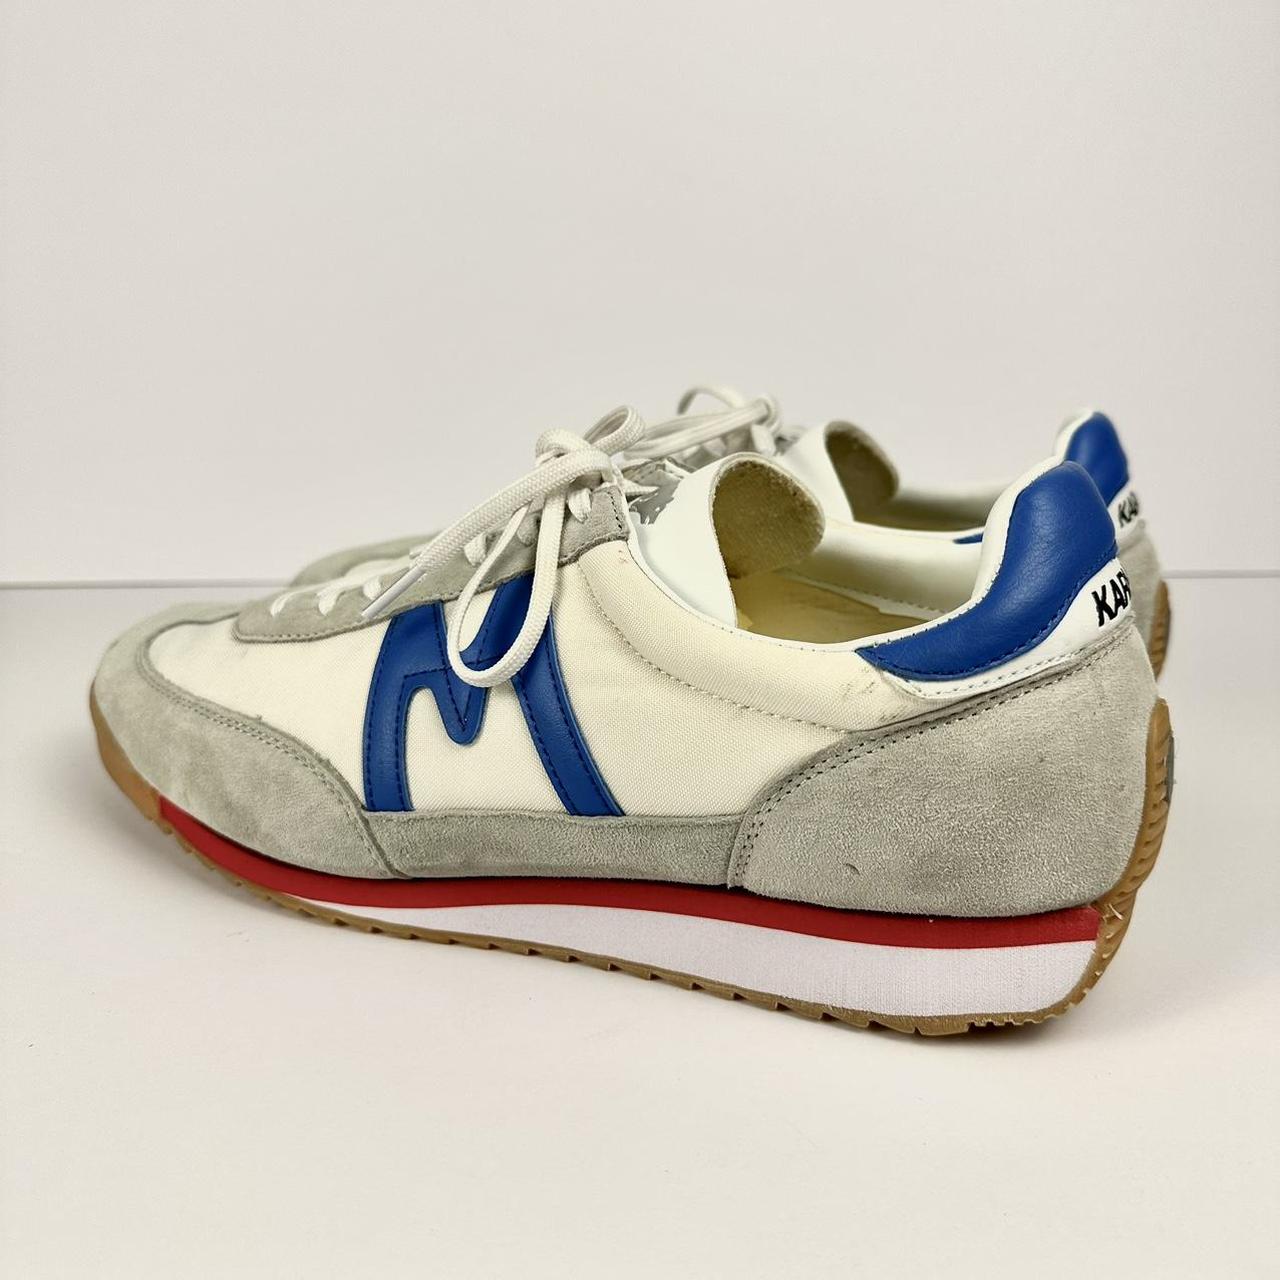 Karhu Men's White and Blue Trainers (5)